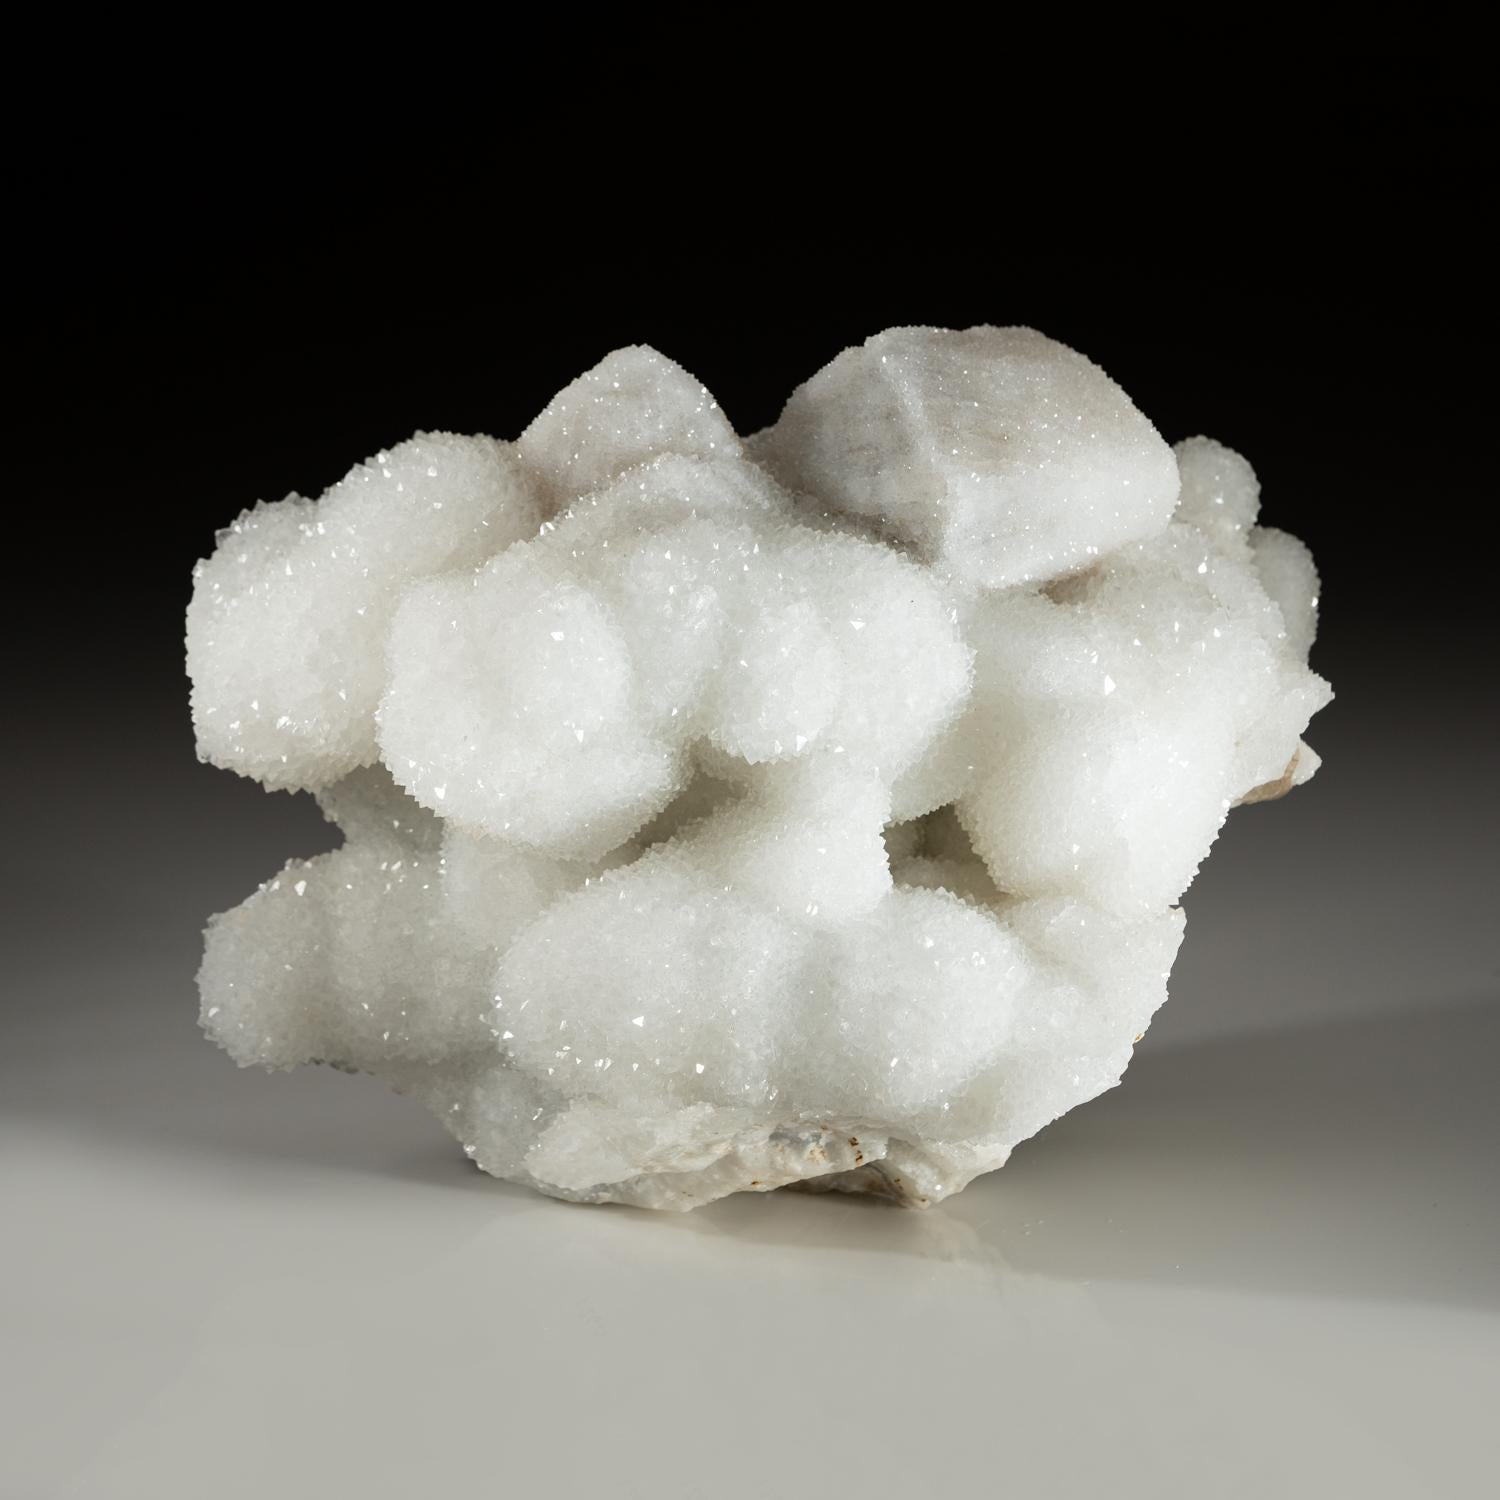 A beautiful and free-form shaped translucent druzy snow quartz clusters from Italy. This specimen has beautiful lustrous quartz crystals. A great gift and a beautiful display item in any room.

Weight: 8.5 lbs, Dimensions: 10 x 4 x 7 inches.